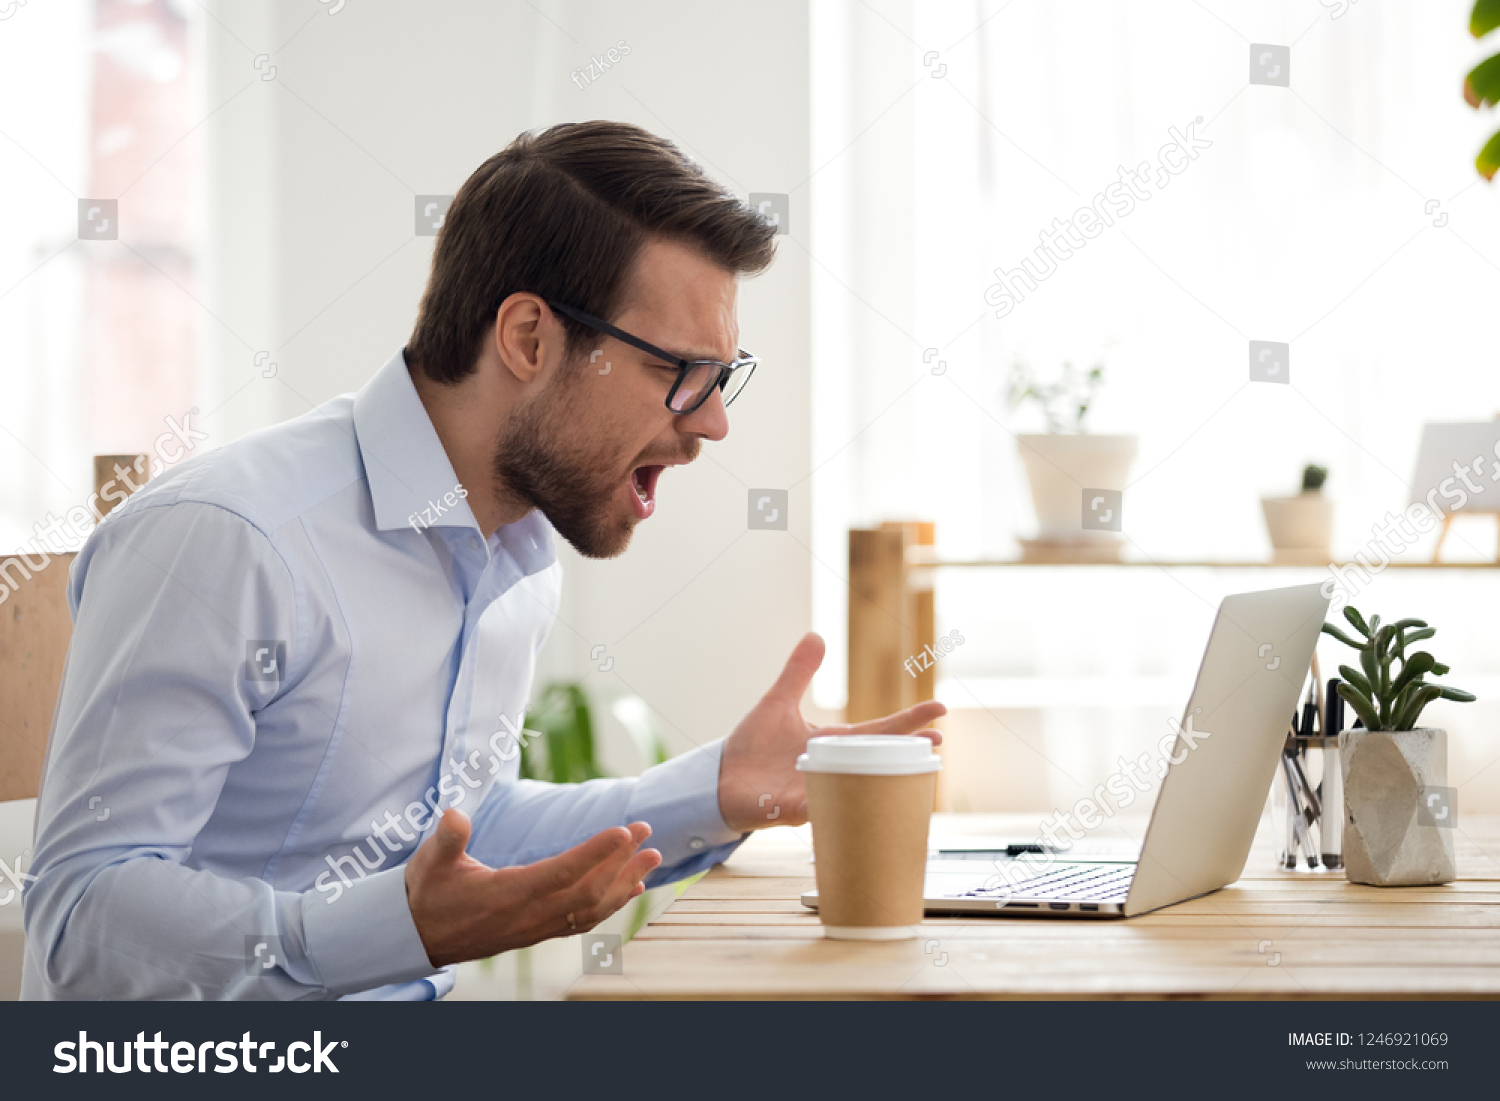 Mad male worker lose temper scream loudly having computer problems or virus attack, furious man shout experience laptop breakdown or data loss while working, angry employee get error message on pc #1246921069